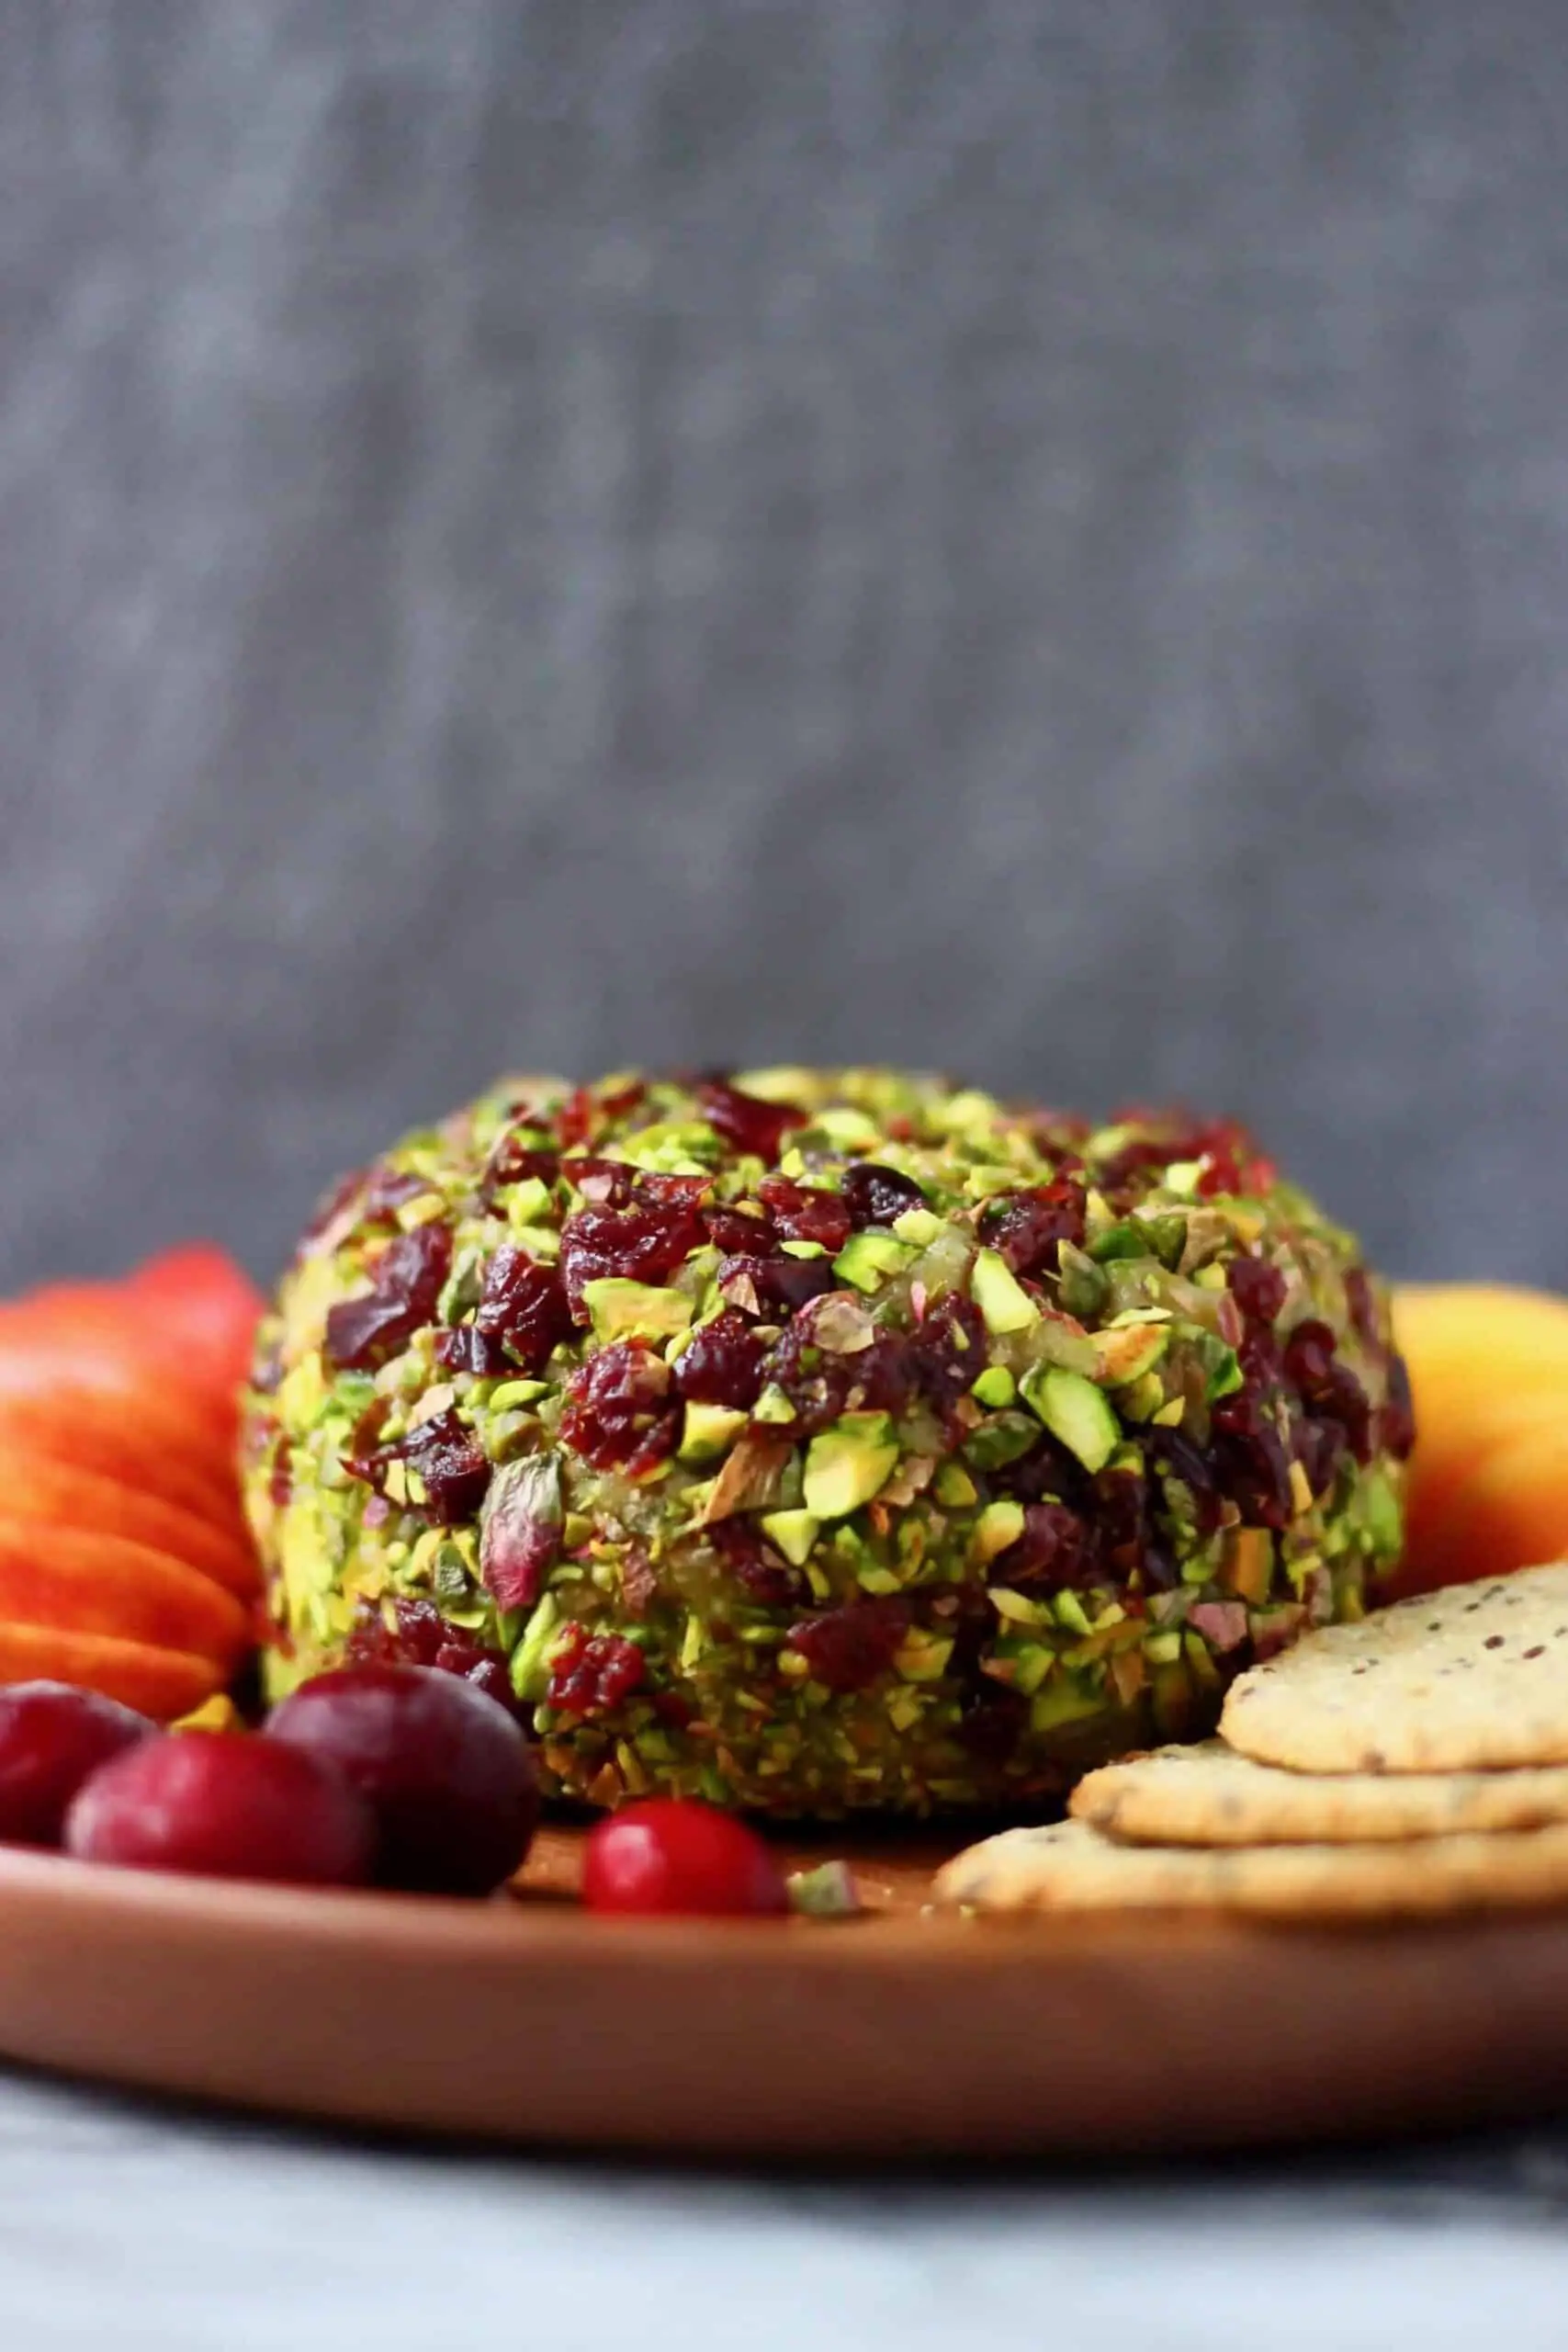 Photo of a ball of cashew cheese covered with chopped pistachios and dried cranberries on a wooden plate with sliced apples, oatcakes and fresh cranberries against a grey background